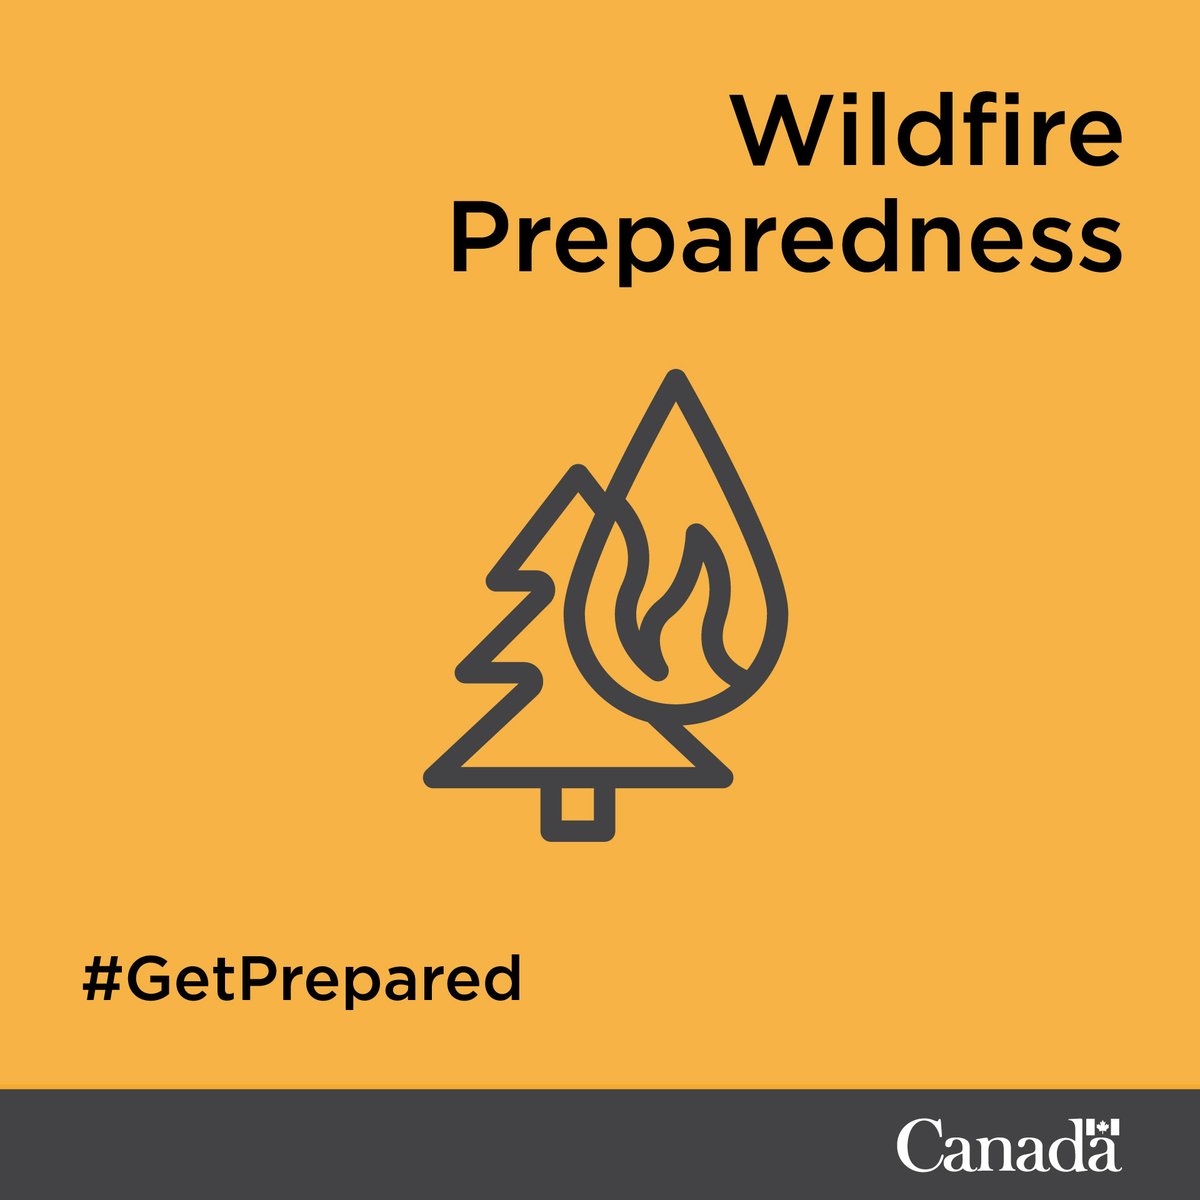 If a #wildfire is approaching your region: •Keep doors and windows shut •Remove flammable drapes •Stay away from outside walls and windows •Be ready to evacuate if ordered to and have your emergency kit and plan ready More: getprepared.gc.ca/cnt/hzd/wldfrs…